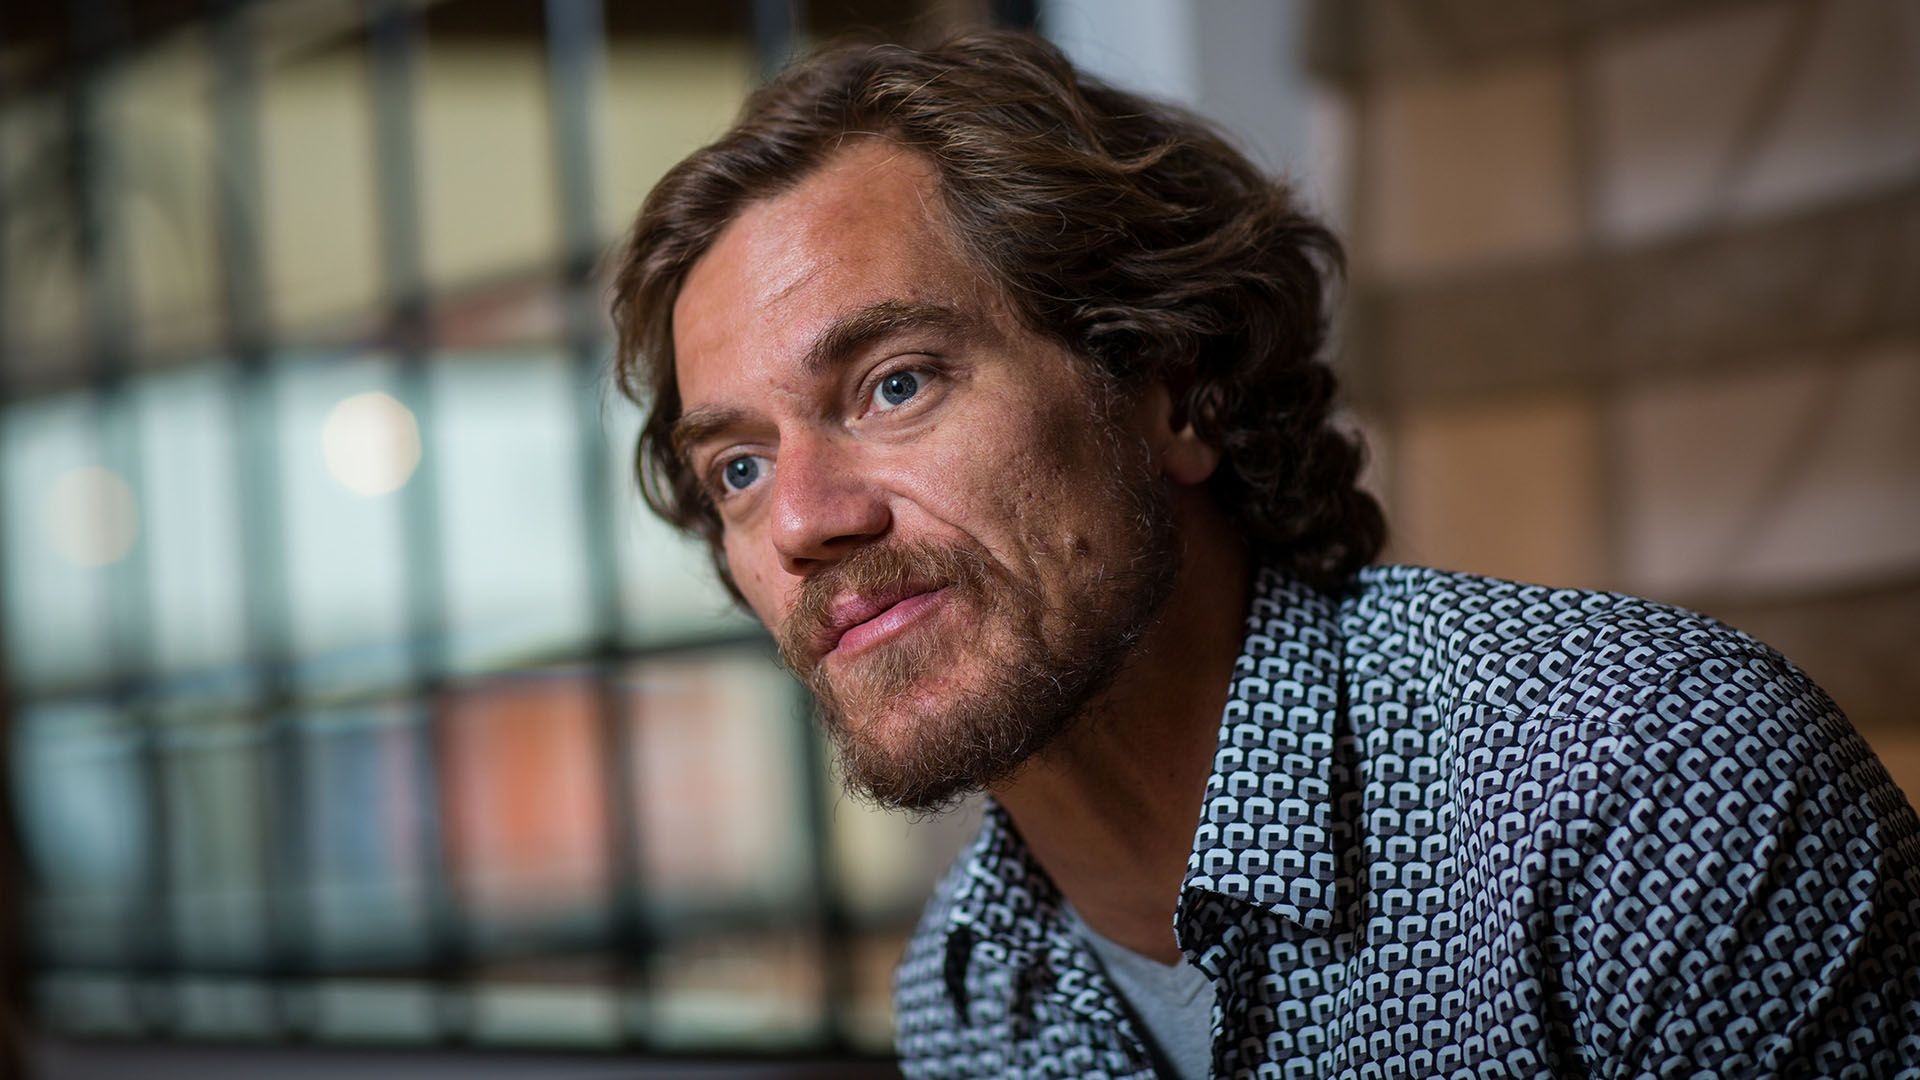 Michael Shannon: Son of Donald Sutherlin Shannon, an accounting professor at DePaul University, and Geraldine Hine, a lawyer. 1920x1080 Full HD Background.